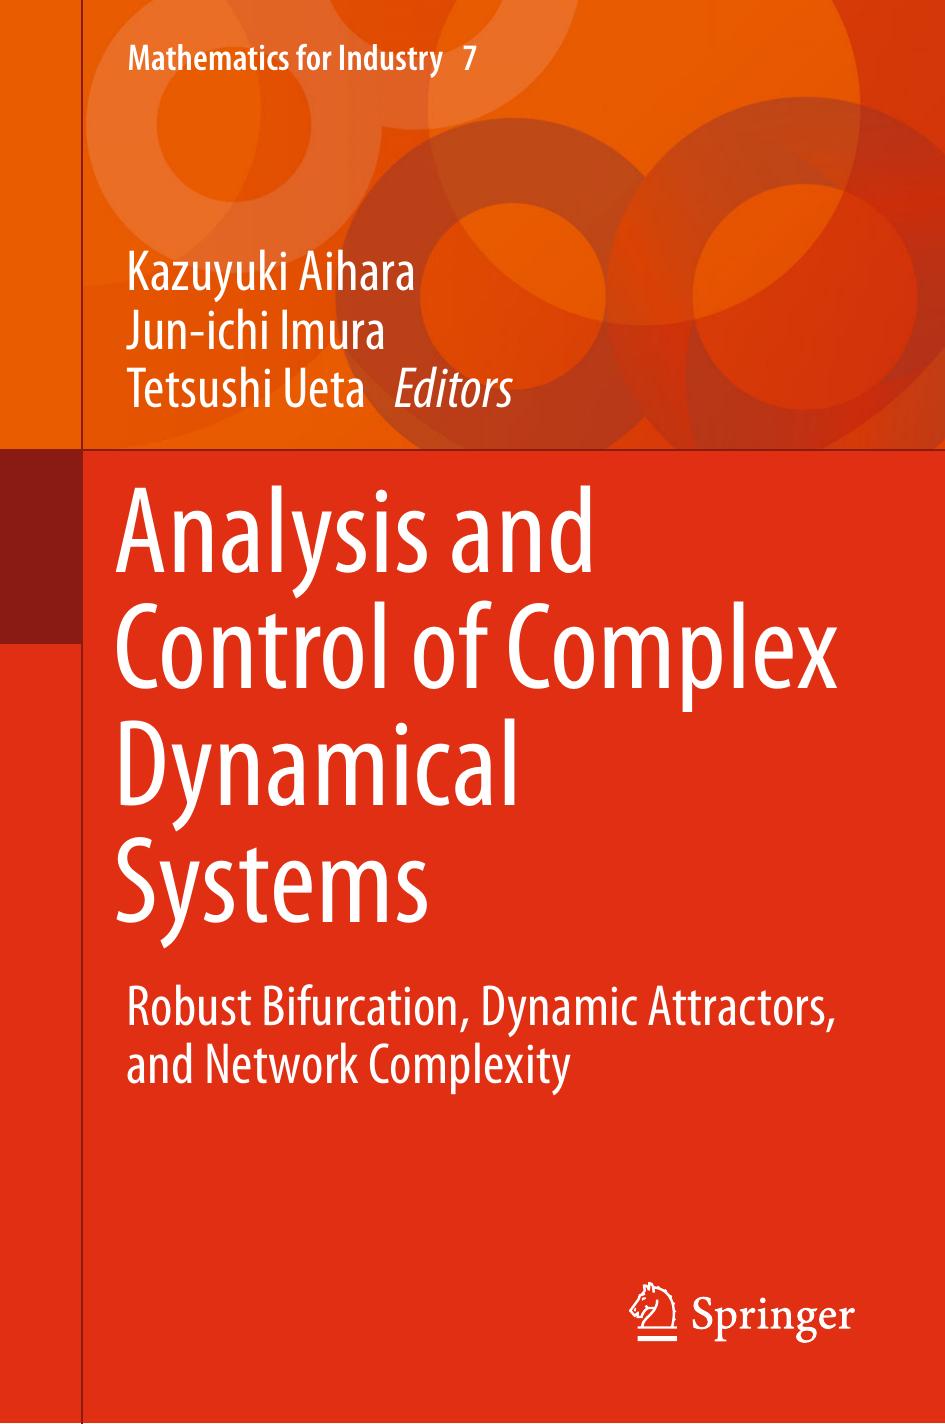 Analysis and Control of Complex Dynamical Systems: Robust Bifurcation, Dynamic Attractors, and Network Complexity